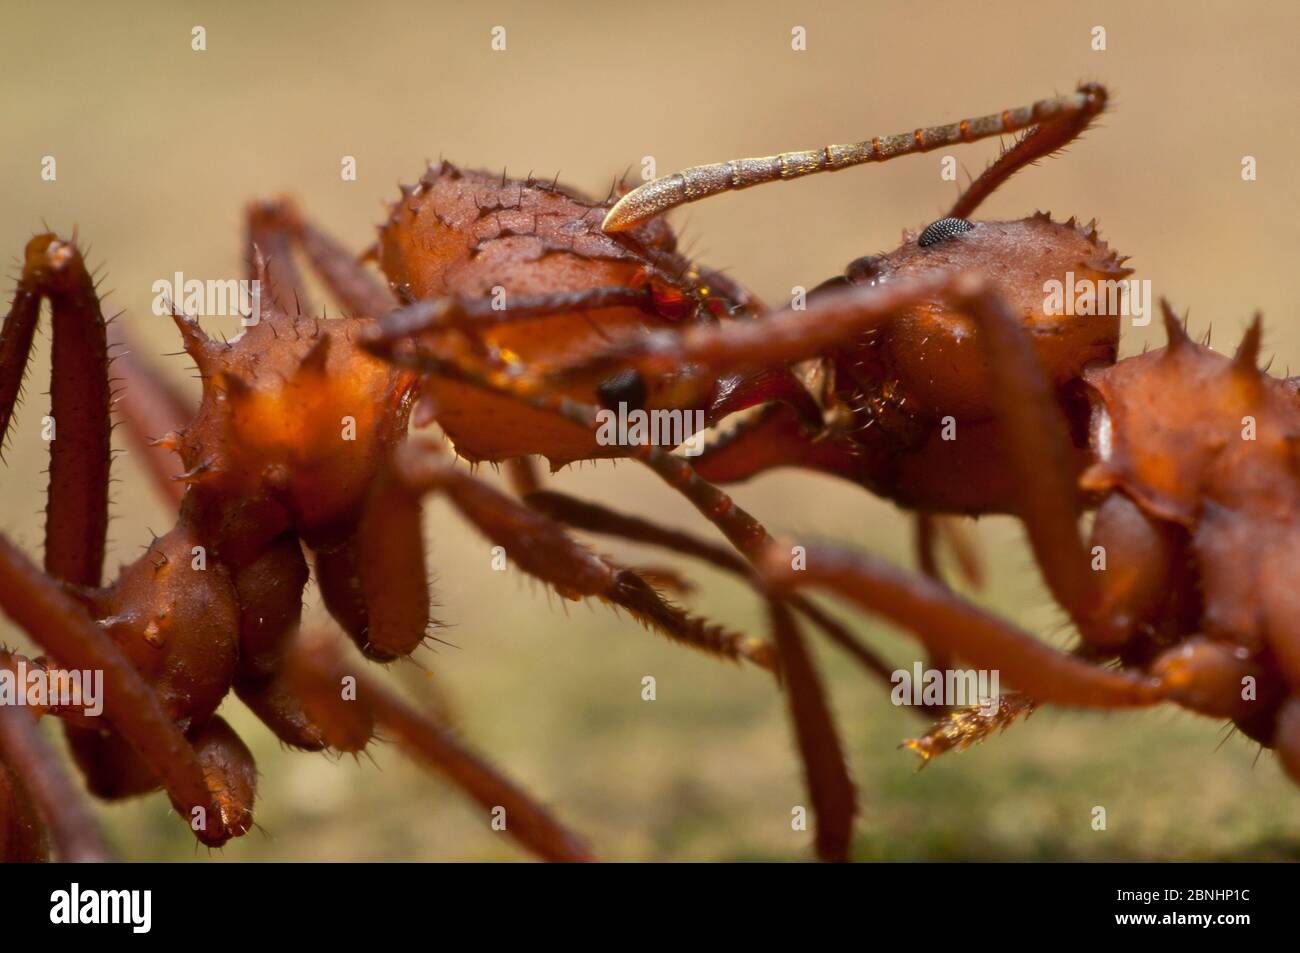 Two Leafcutter ants (Atta) transferring food, Guadeloupe National Park, Guadeloupe. Stock Photo